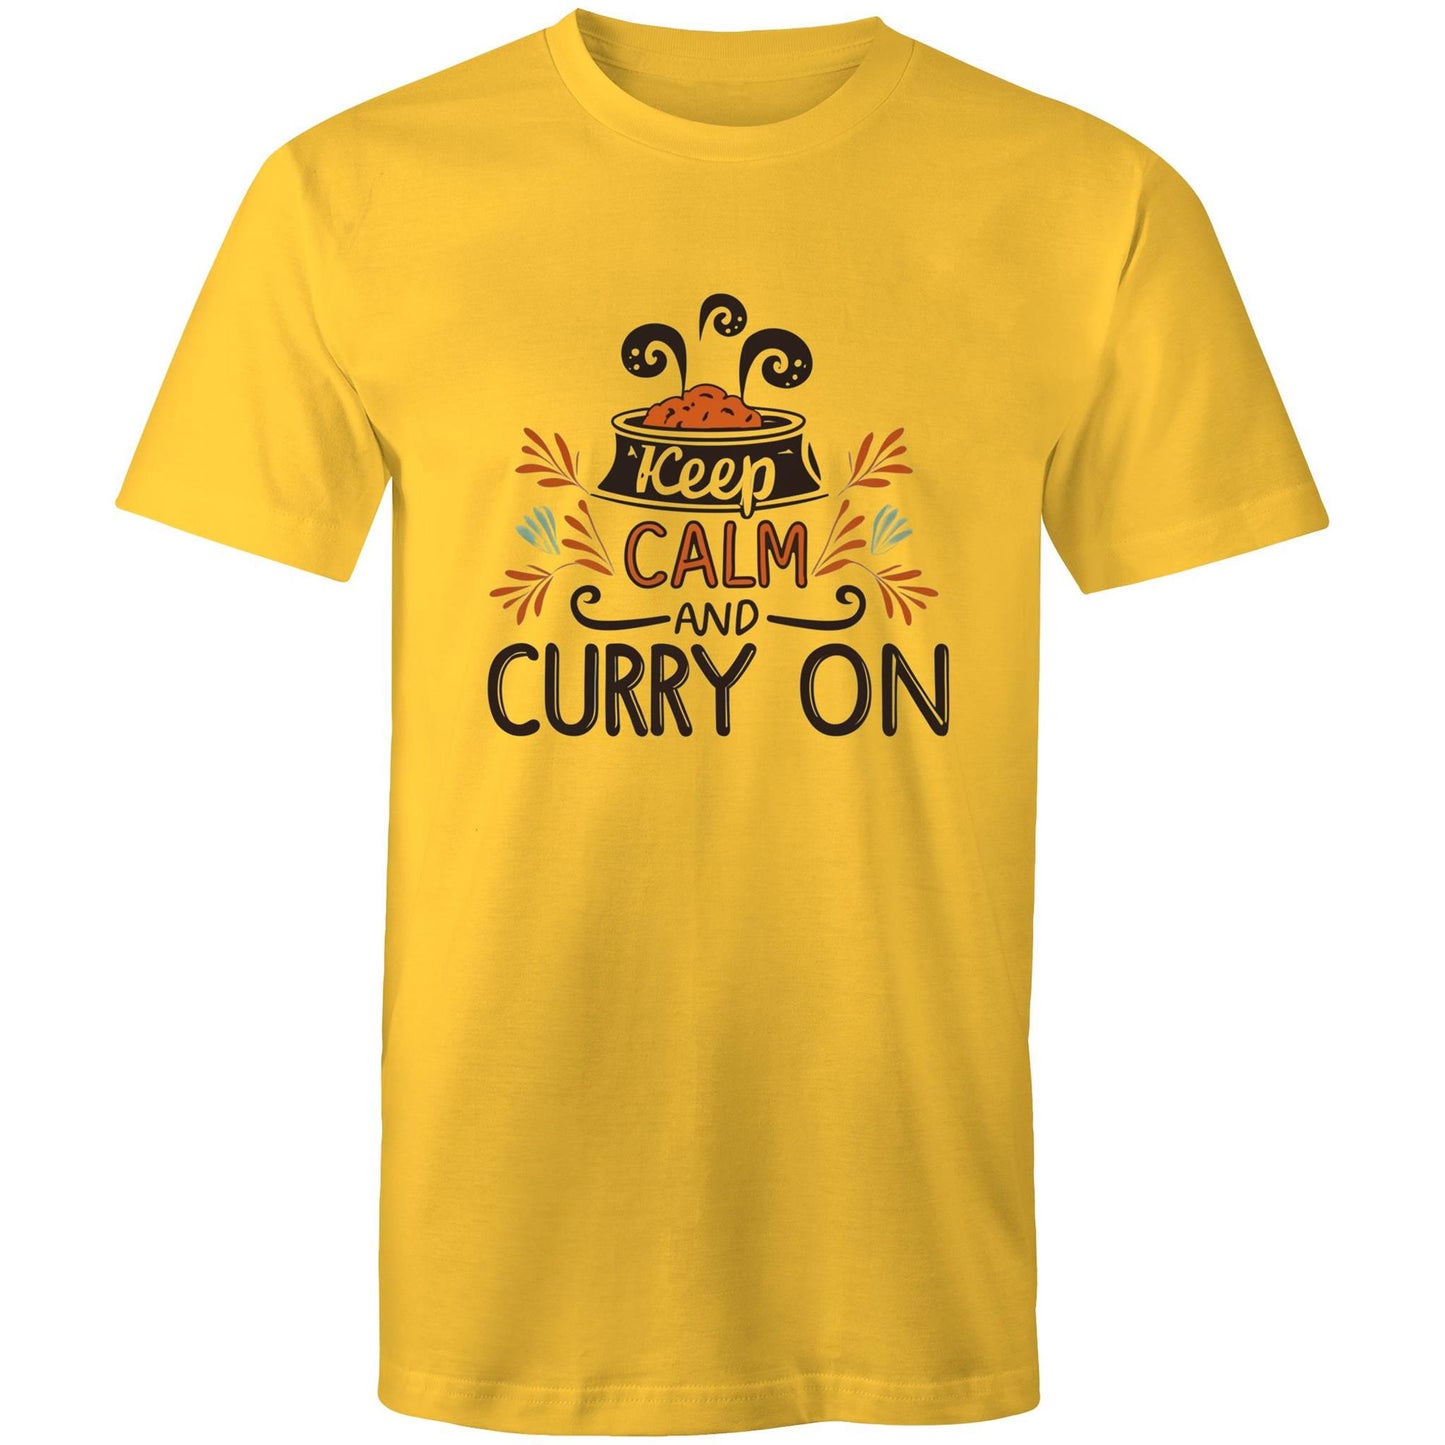 Keep Calm and Curry On - Mens T-Shirt